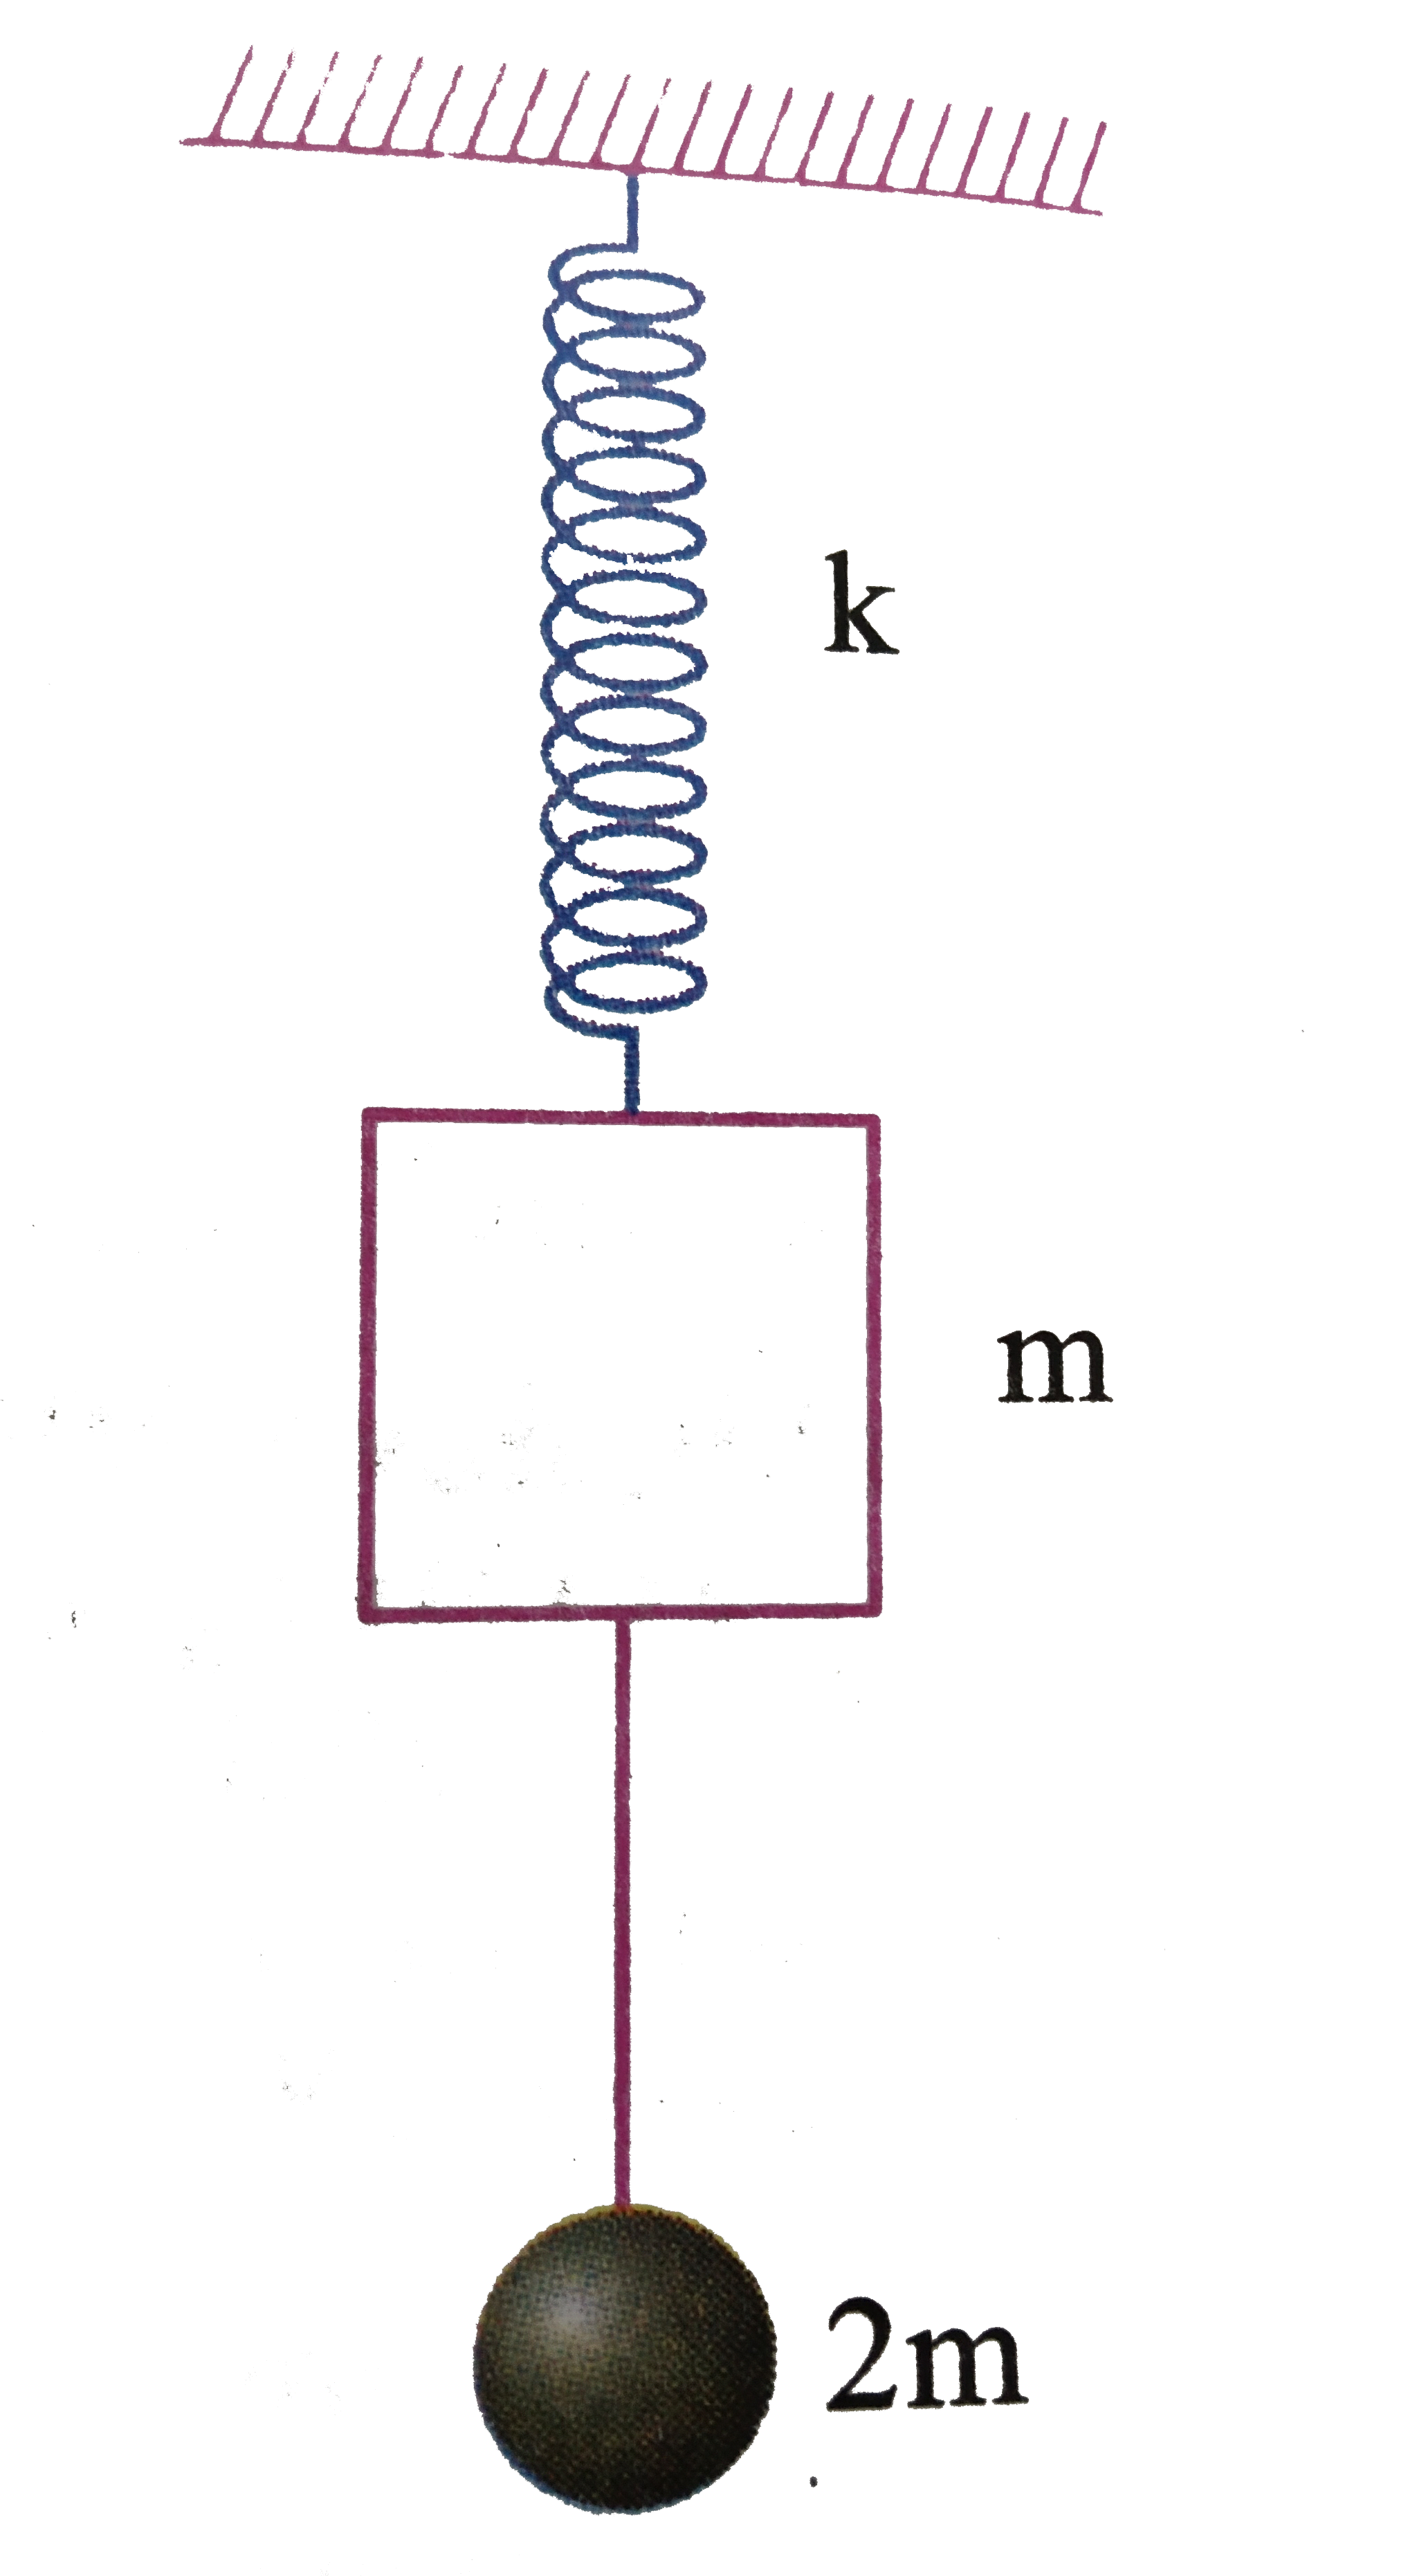 A bob of mass 2m hanges by a string attached to the block of mass m of a spring blocks syetem. The whole arrangement is in a state of equilibrium. The bob of mass 2m is pulled down slowely by a distance x(0) and released.